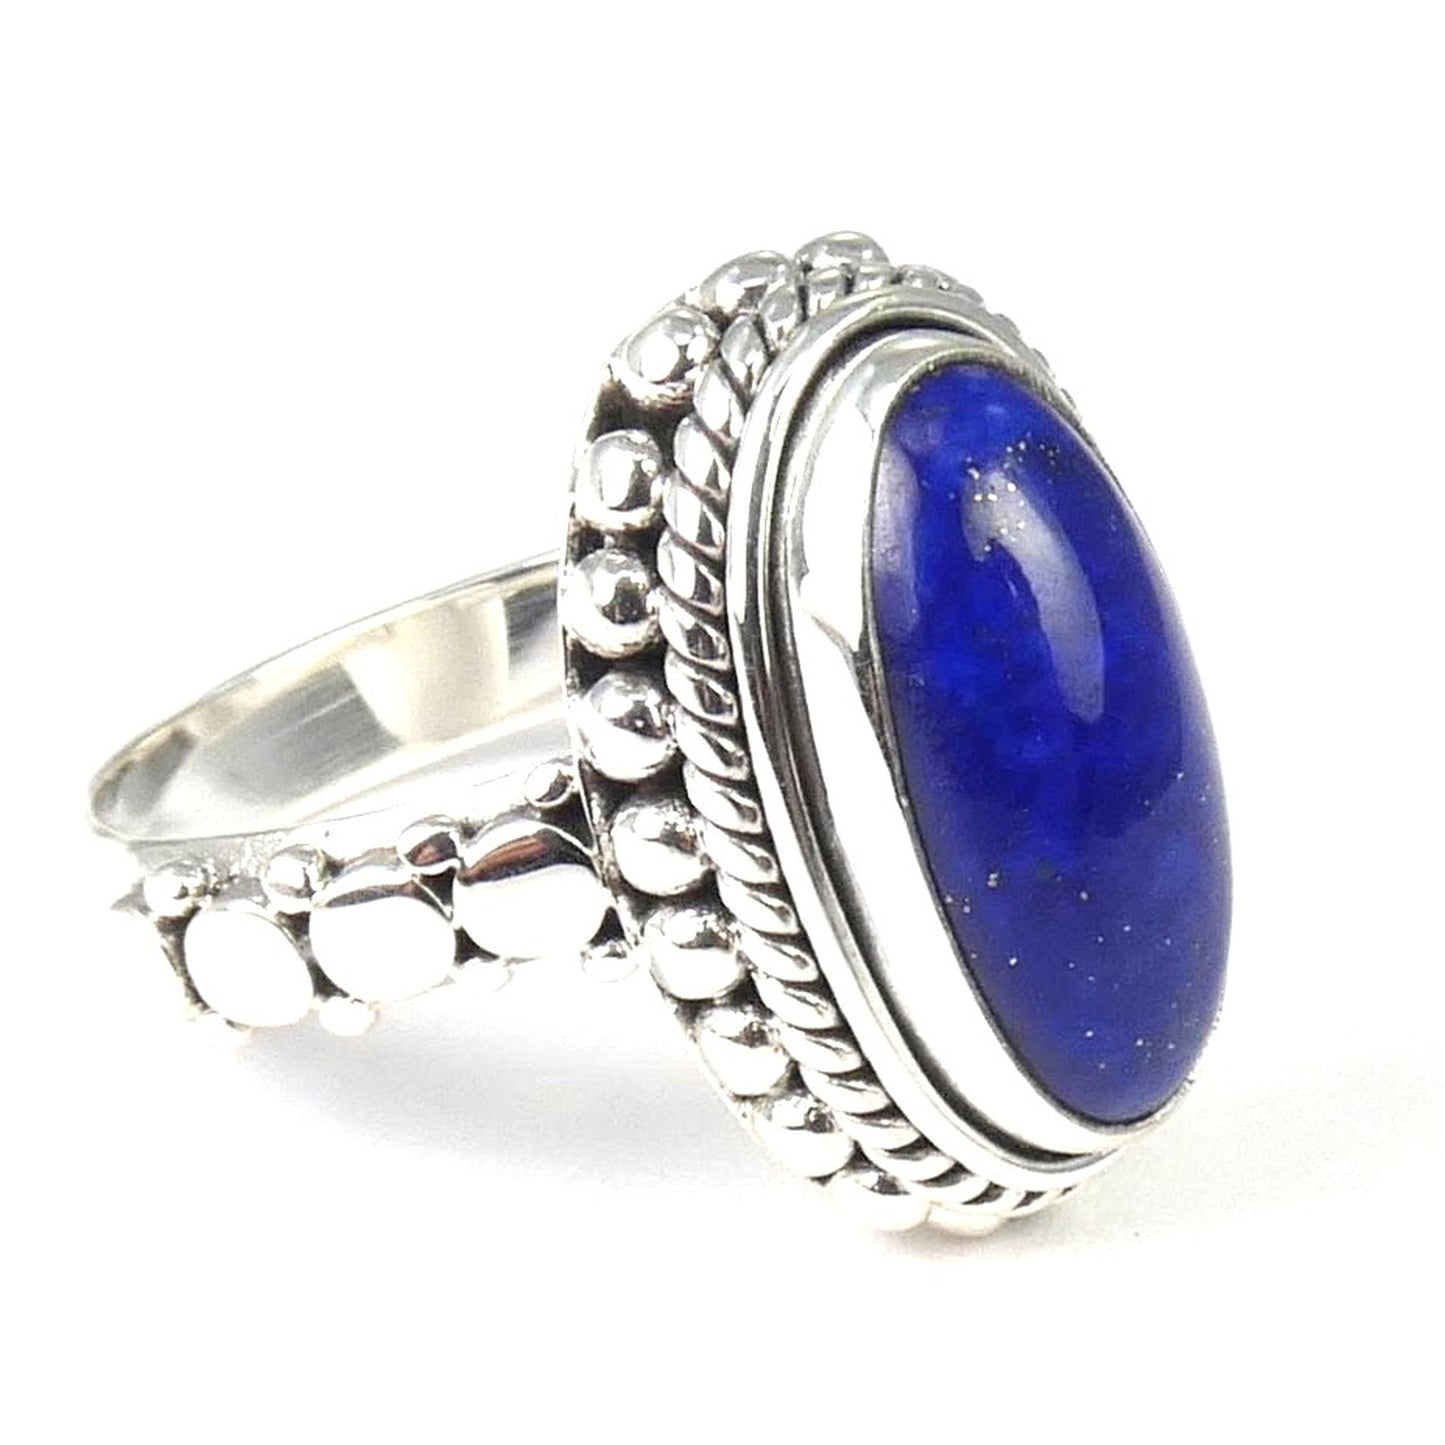 R007LA PADMA .925 Sterling Silver Ring with Lapis Lazuli